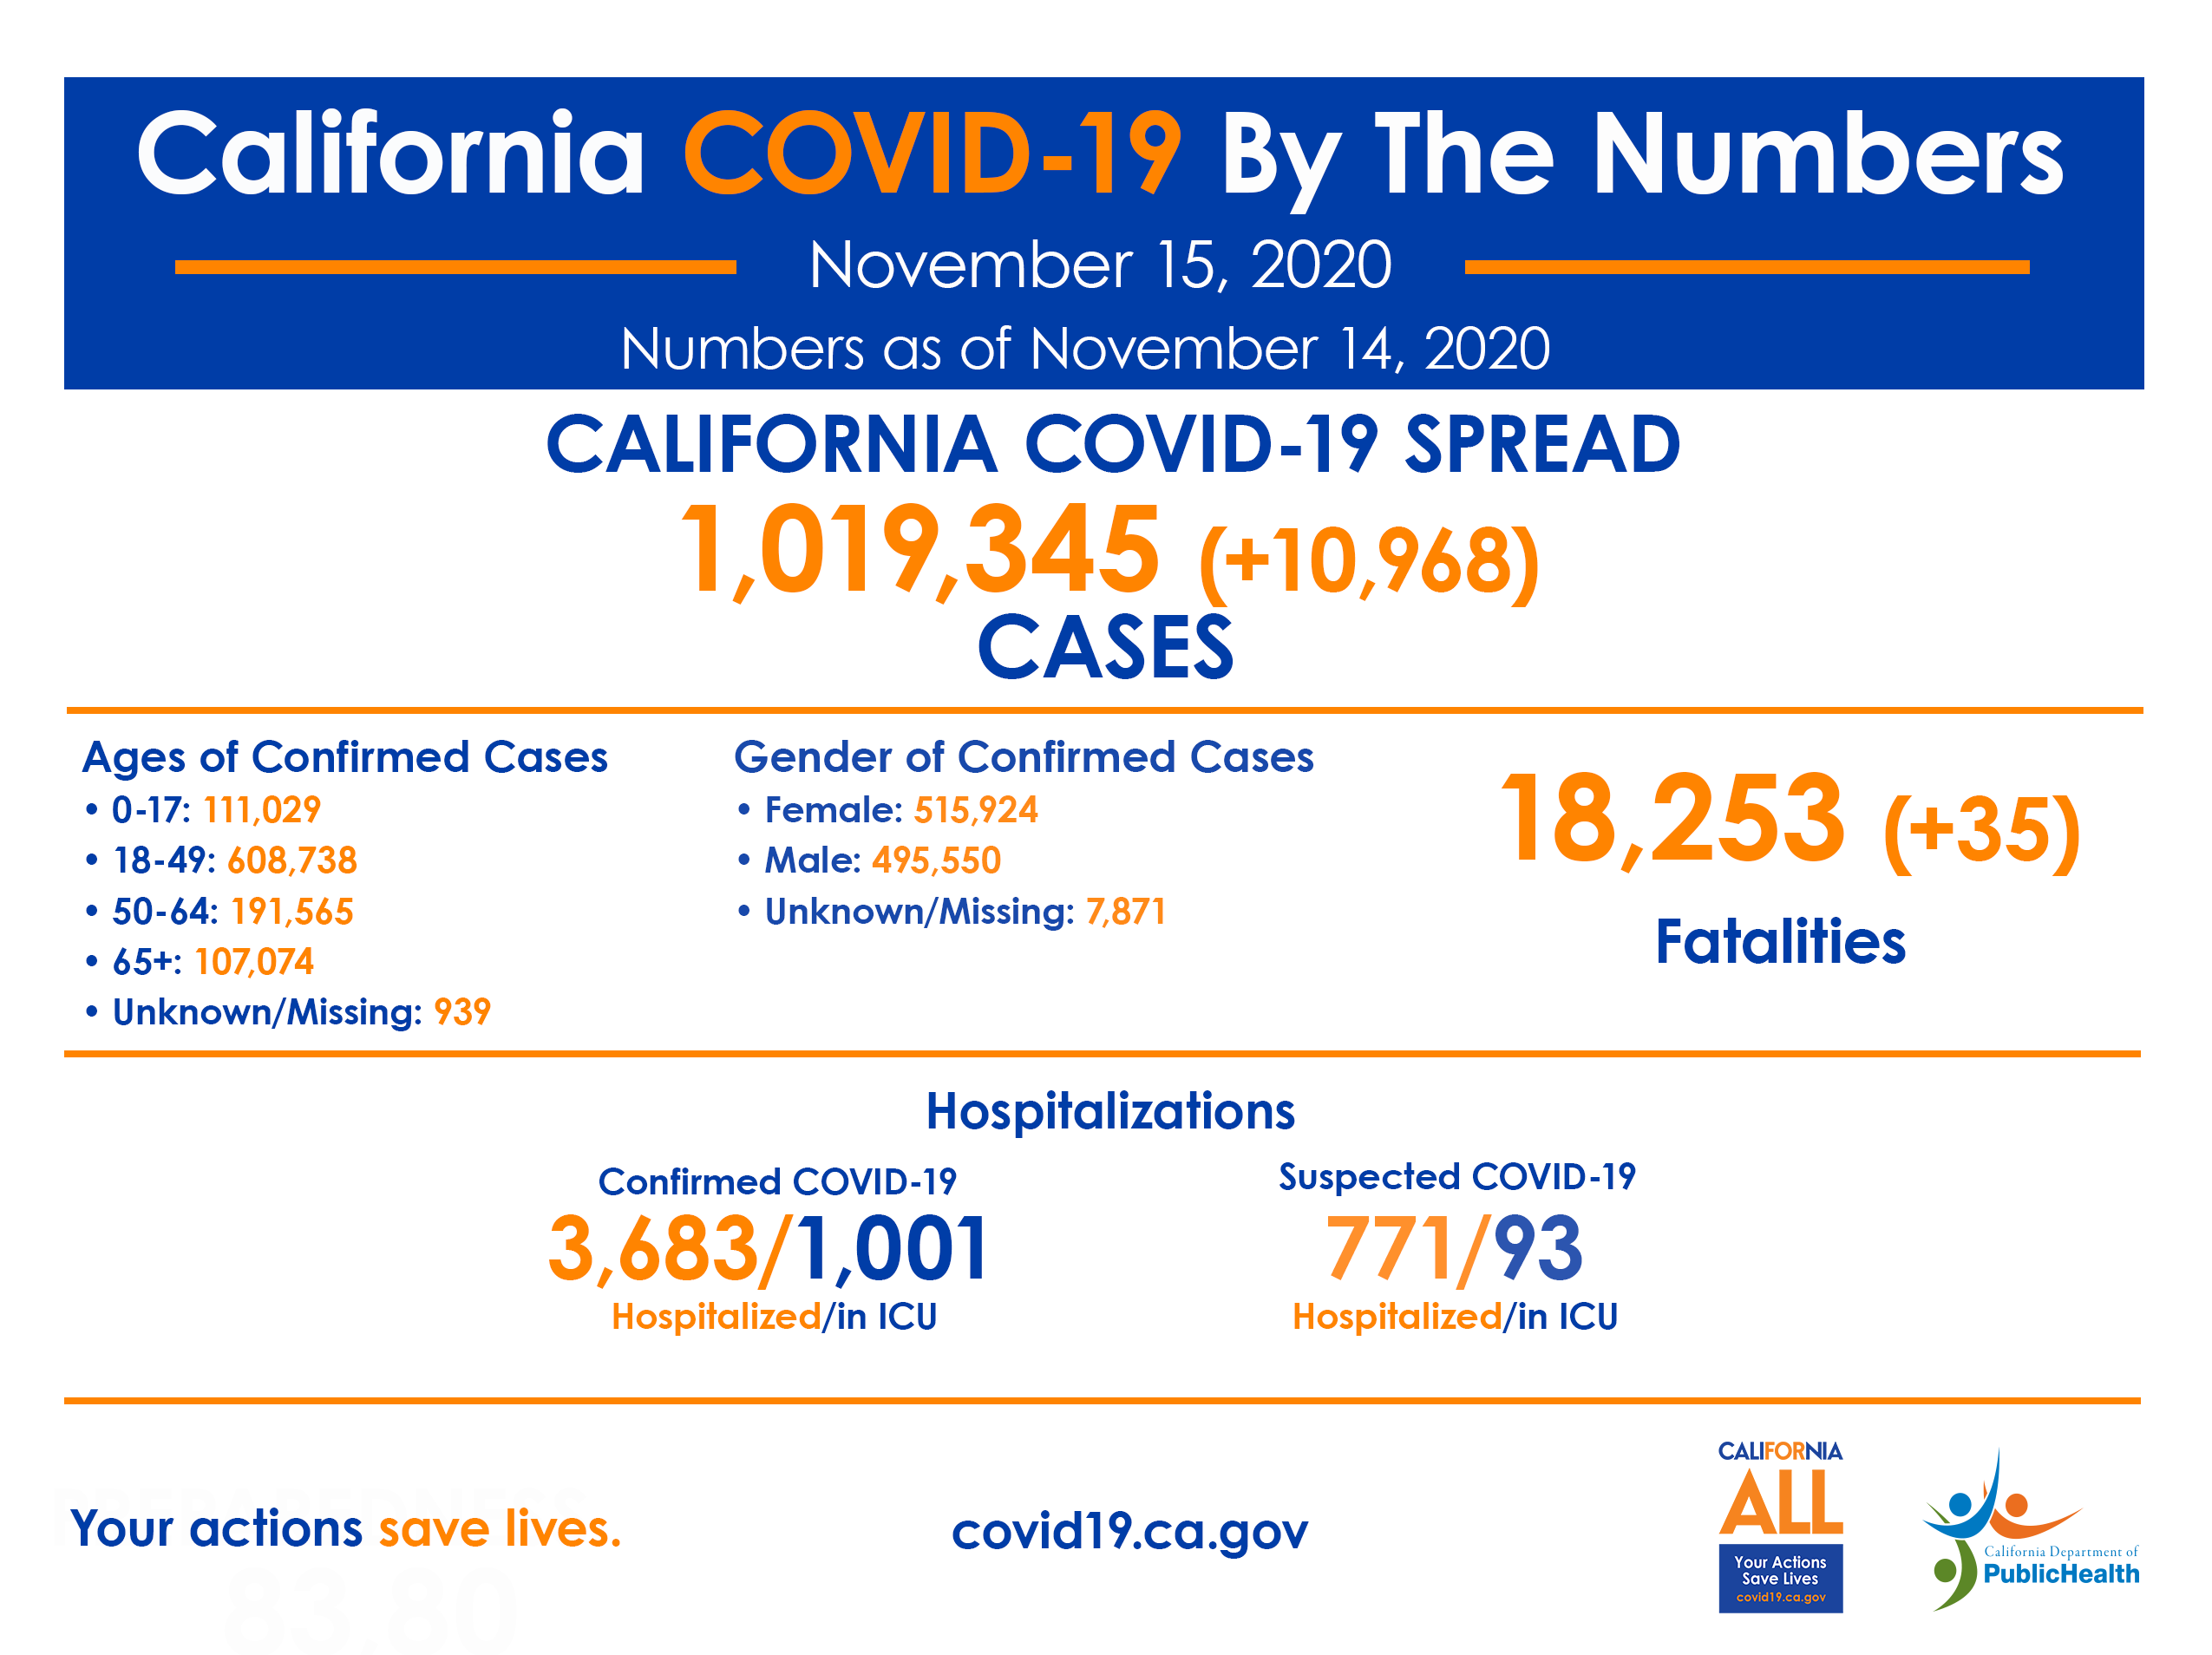 CA COVID-19 by the numbers